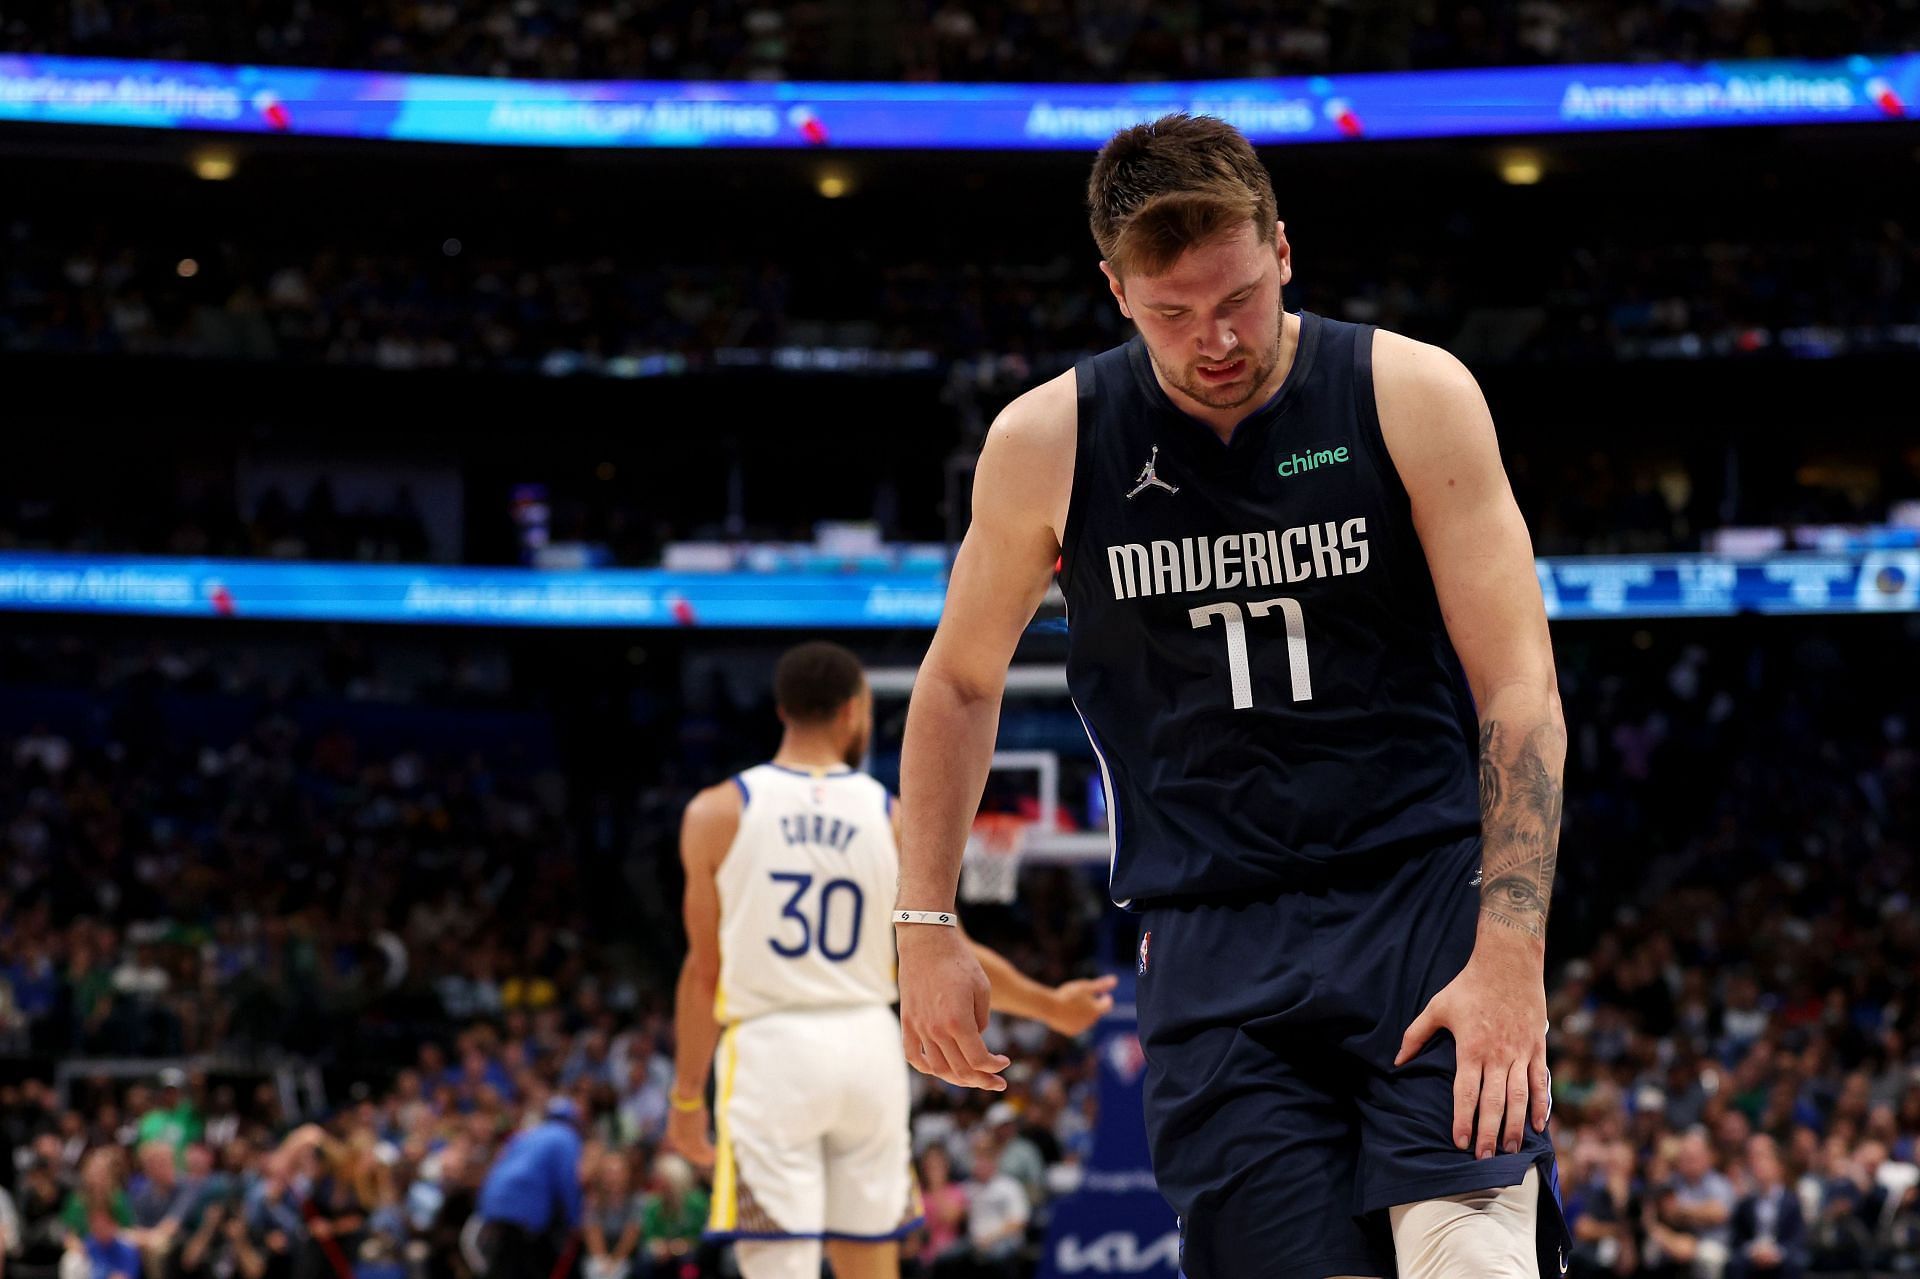 Luka Dončić is now 2-6 in games where he scores 40+ points in the playoffs.